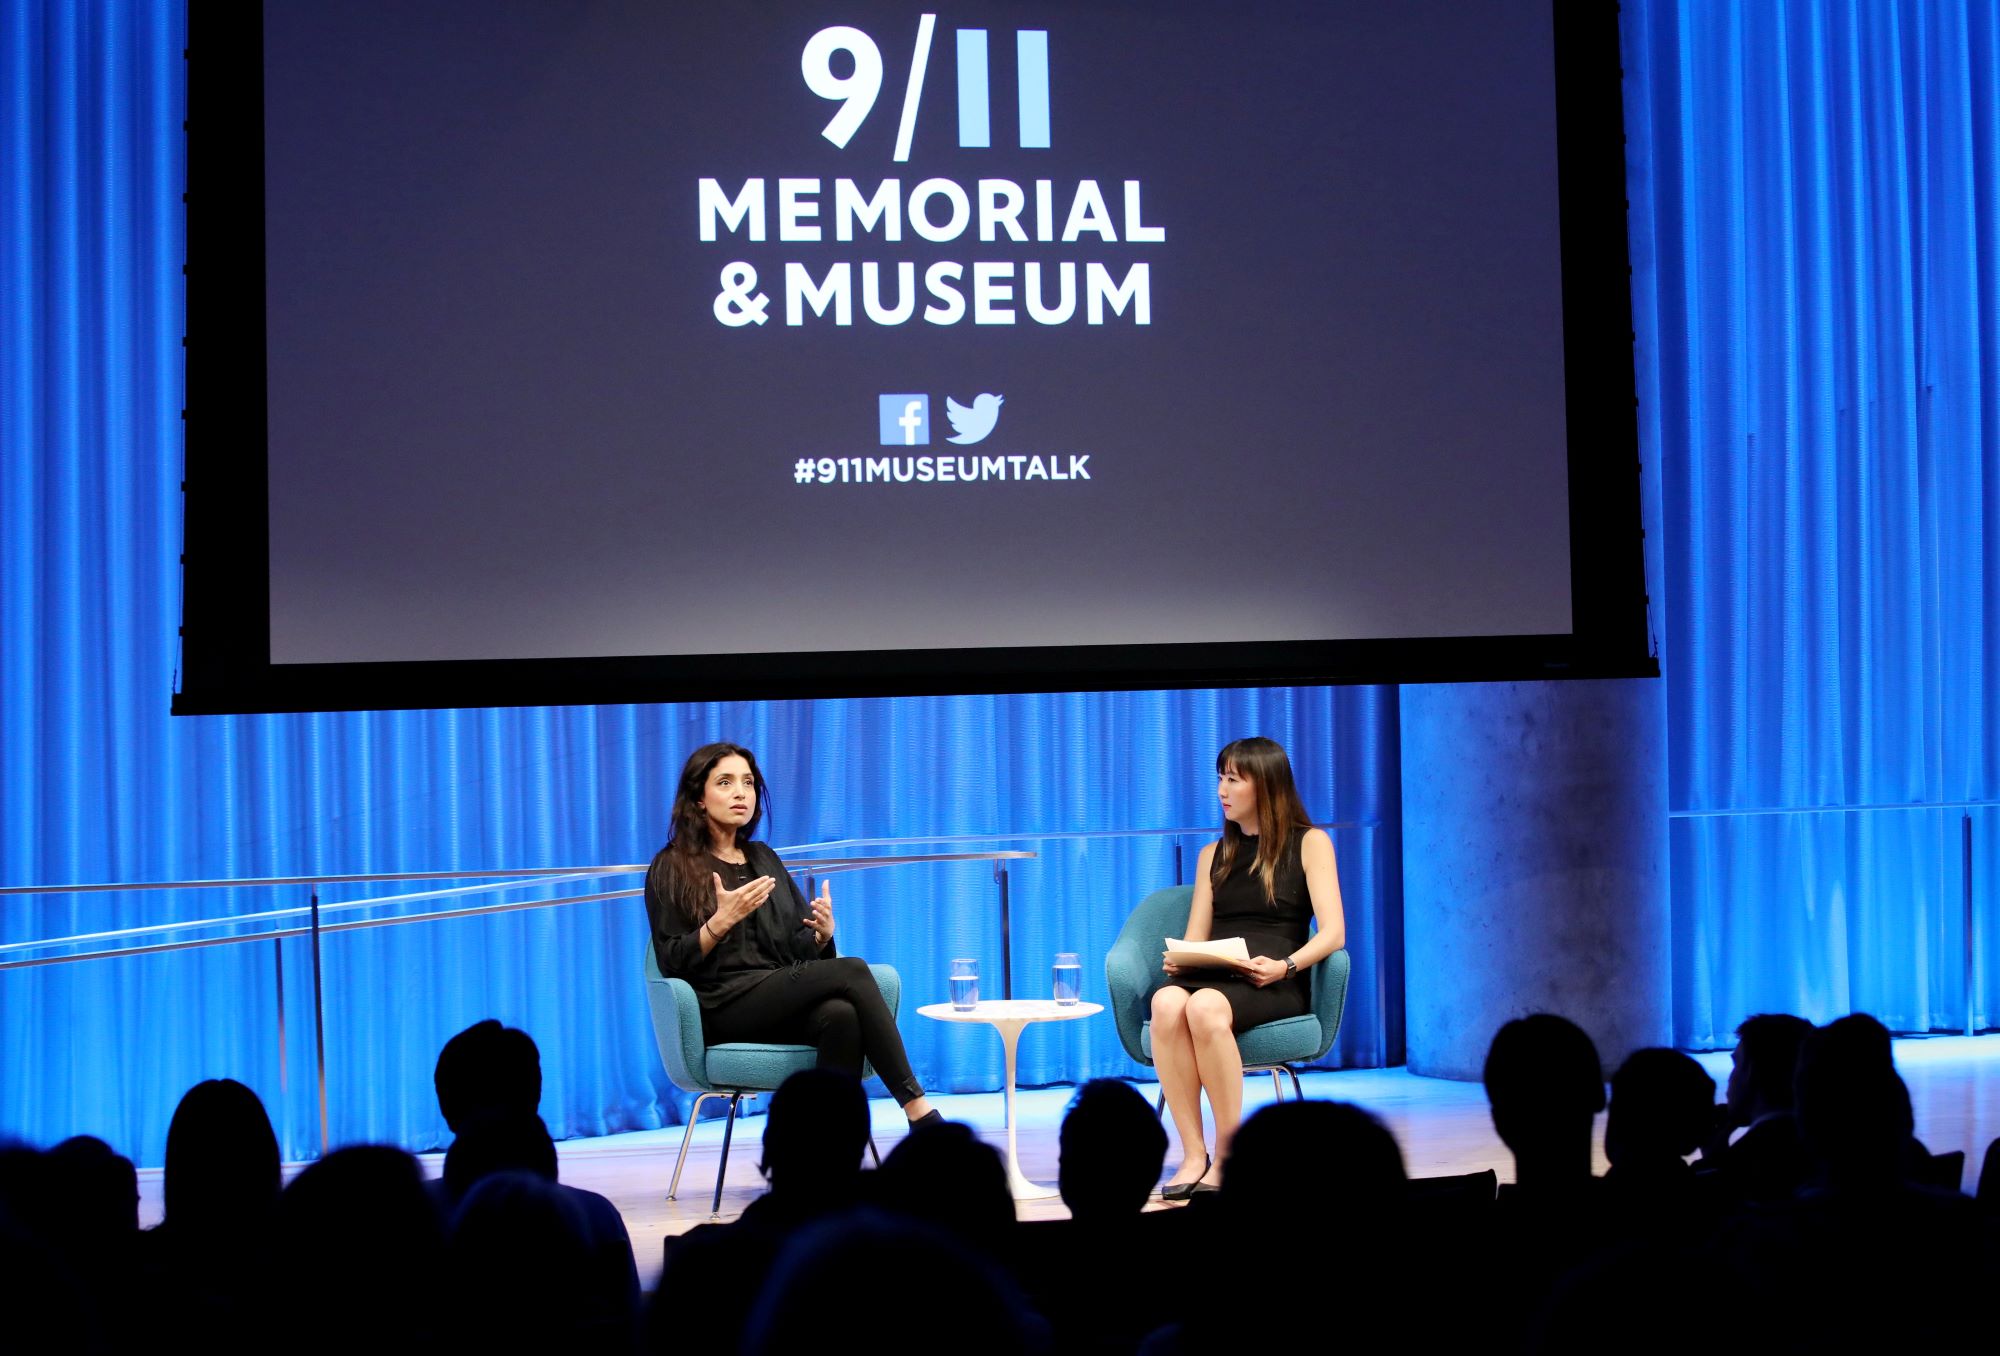 In this wide-angle photo of the Museum Auditorium stage, Emmy Award–winning documentarian Deeyah Khan speaks to the audience while seated next to a woman hosting the event. The audience members are silhouetted by blue and white lights shining on the stage. A large projector screen has been lowered above the two of them.